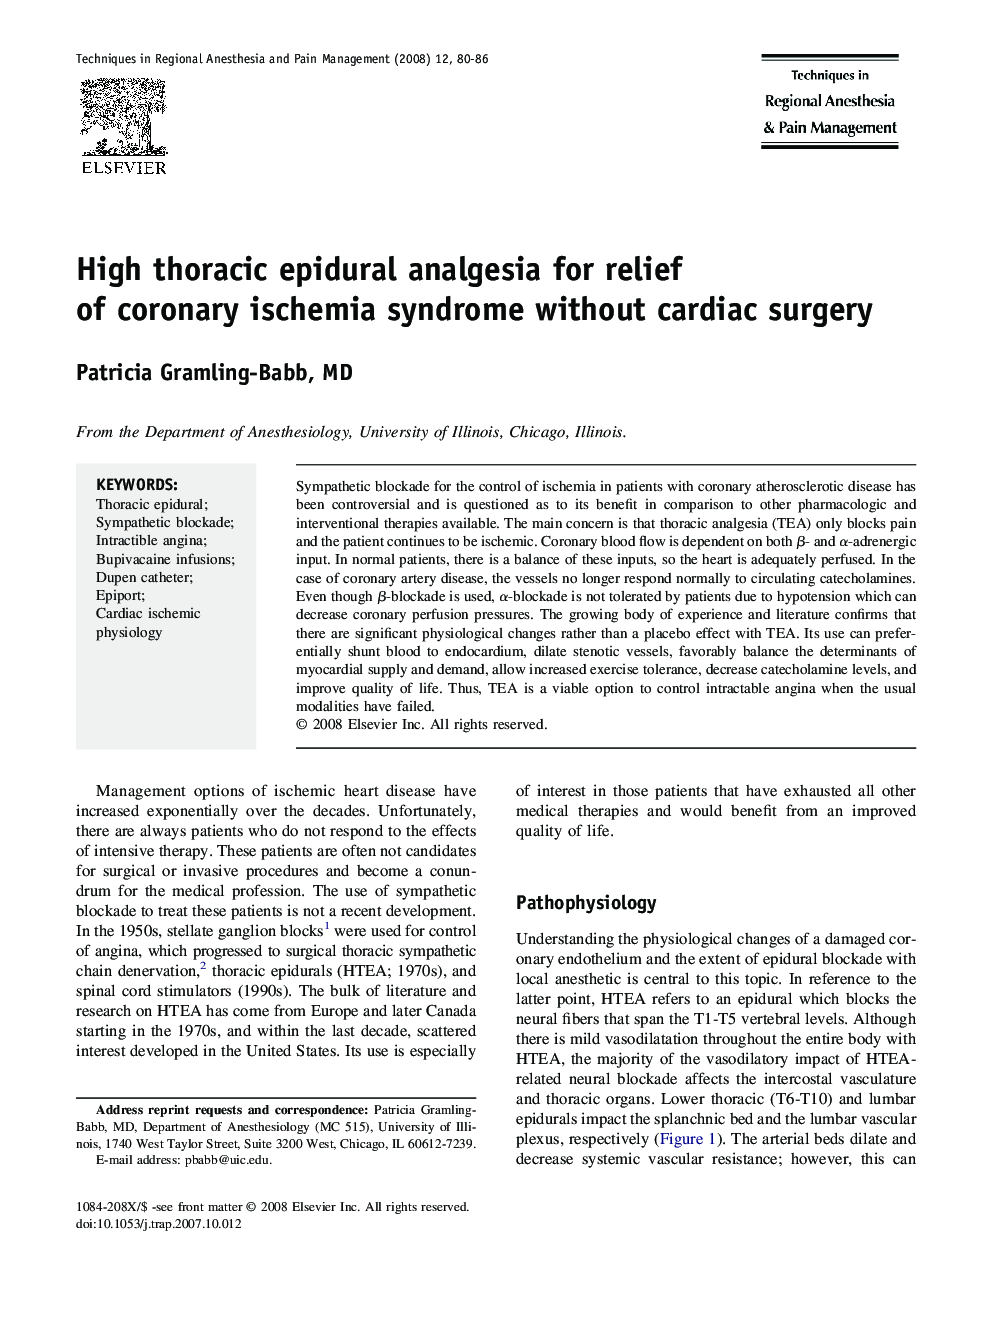 High thoracic epidural analgesia for relief of coronary ischemia syndrome without cardiac surgery